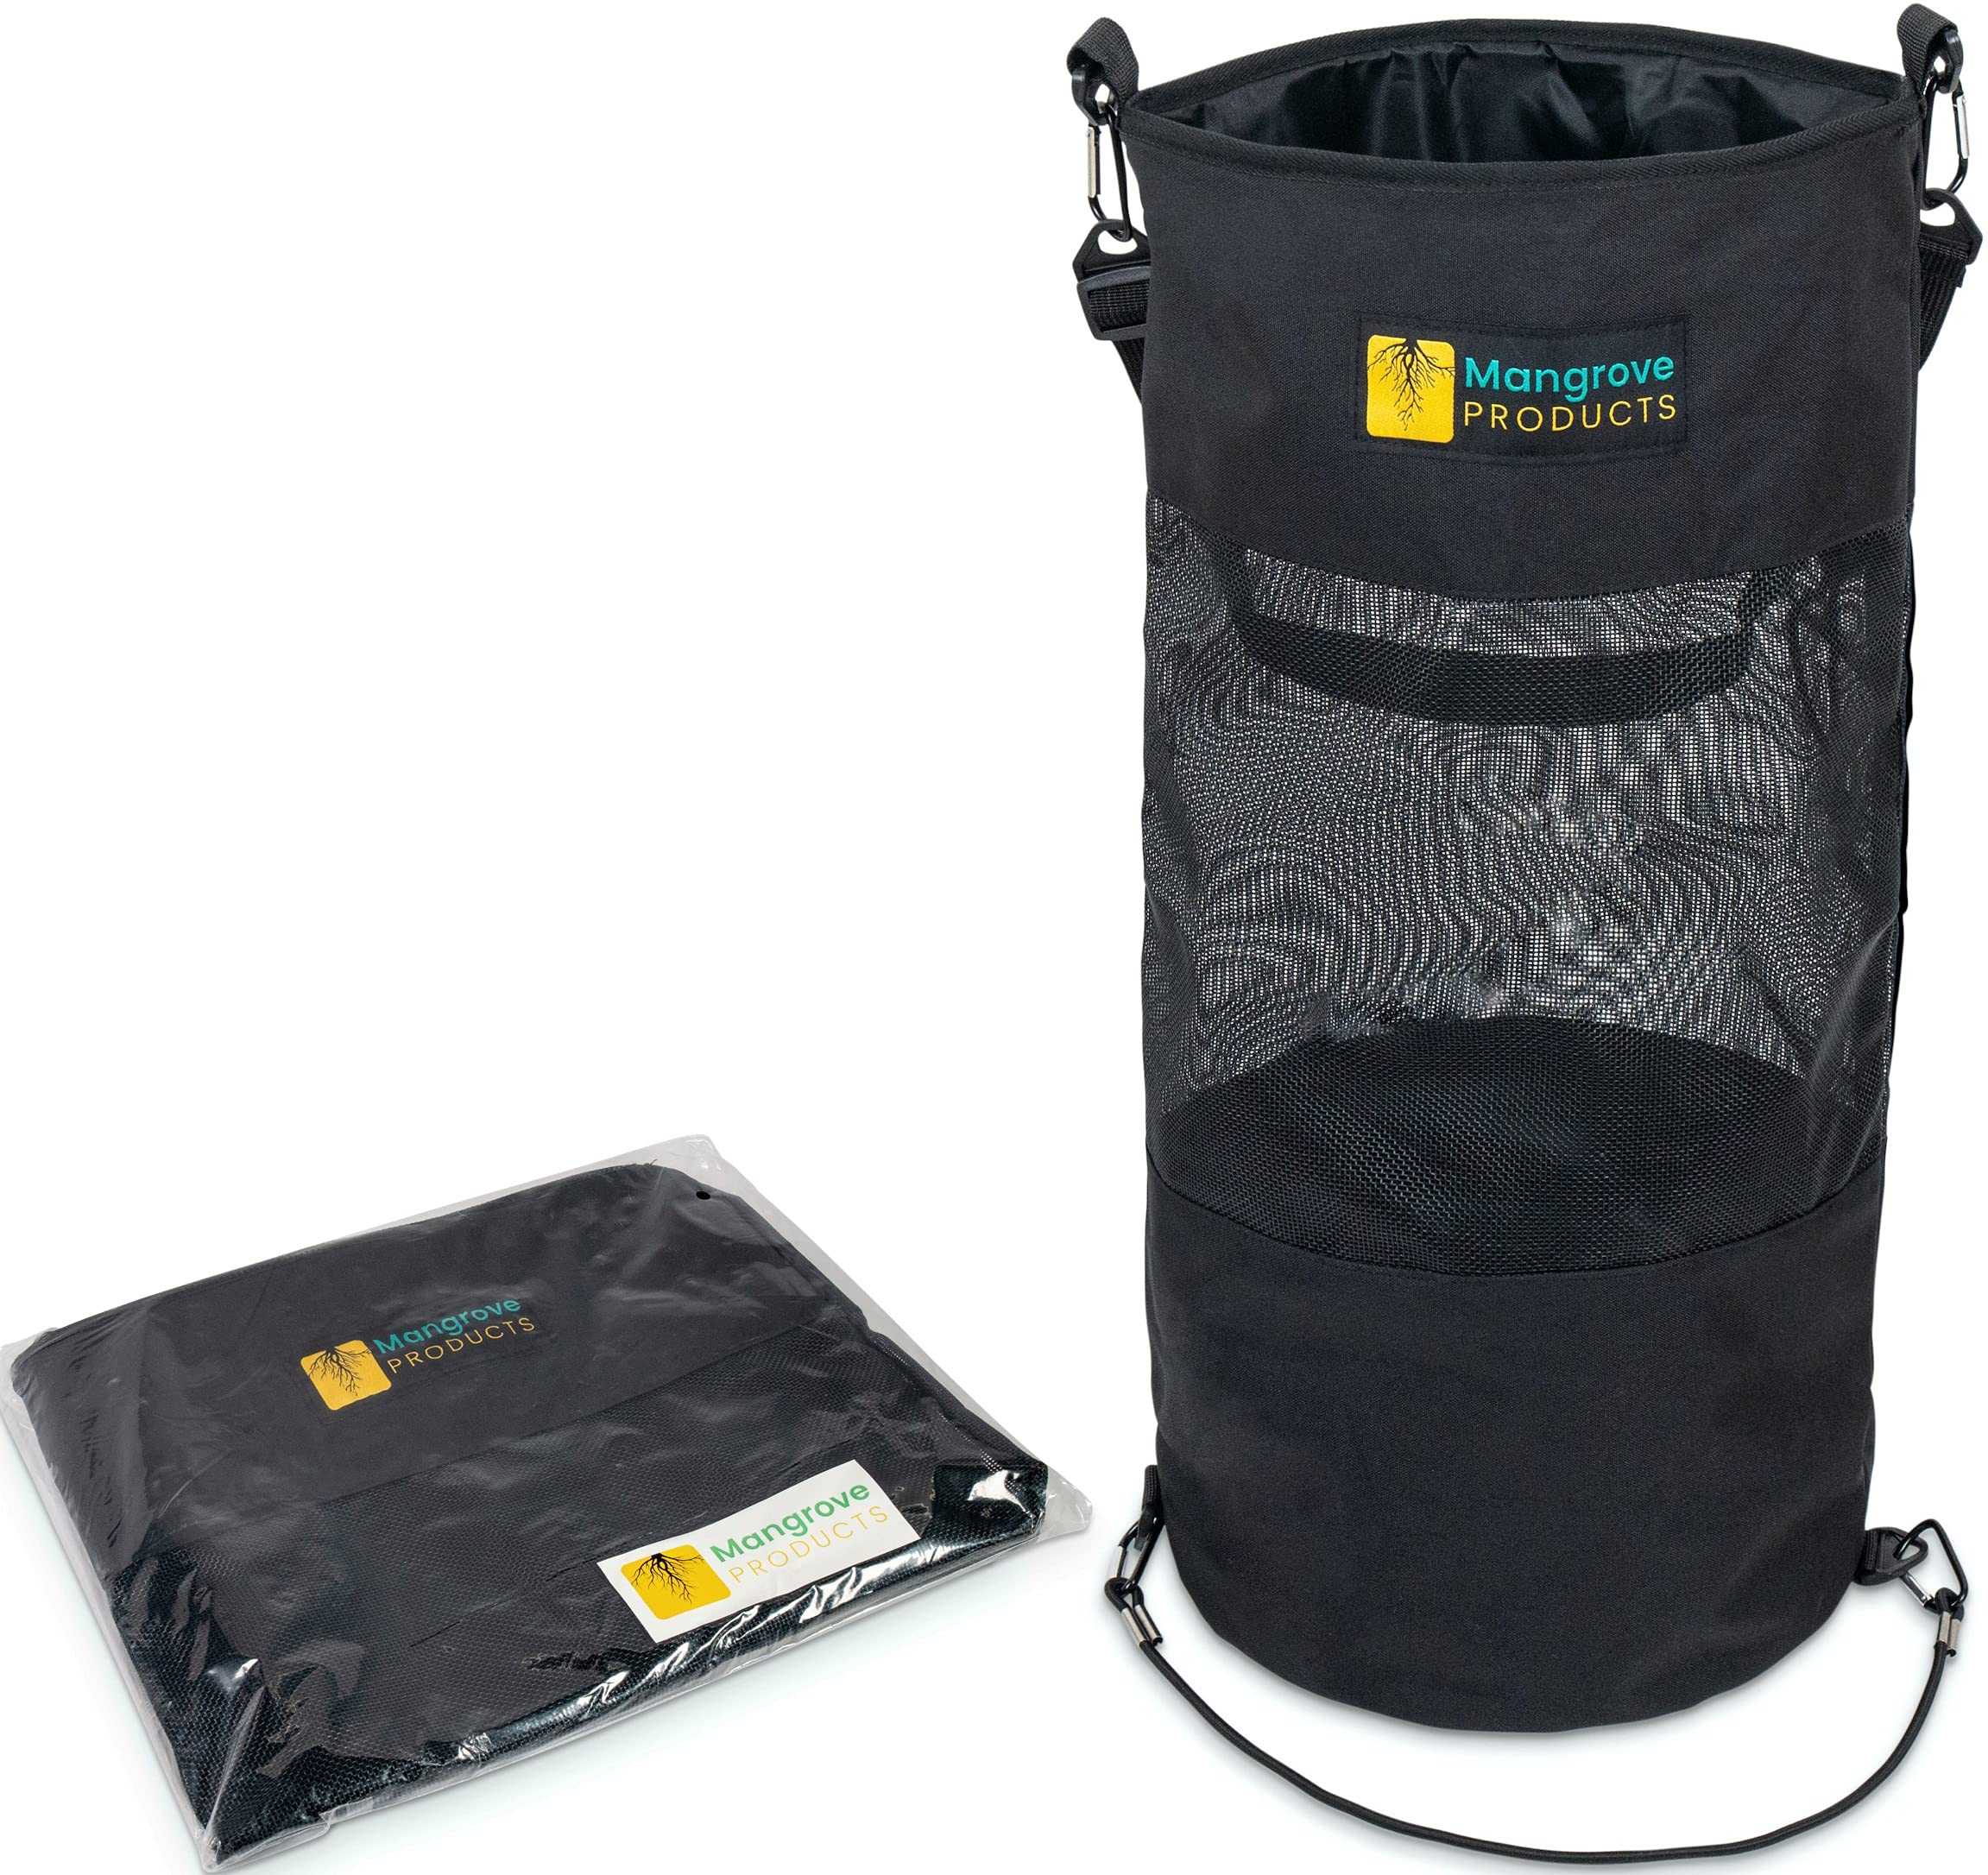 Mangrove Products: Portable Boat Trash Can, Reusable Trash Bag, Boating  Equipment, Boat Storage, Boat Accessories Marine